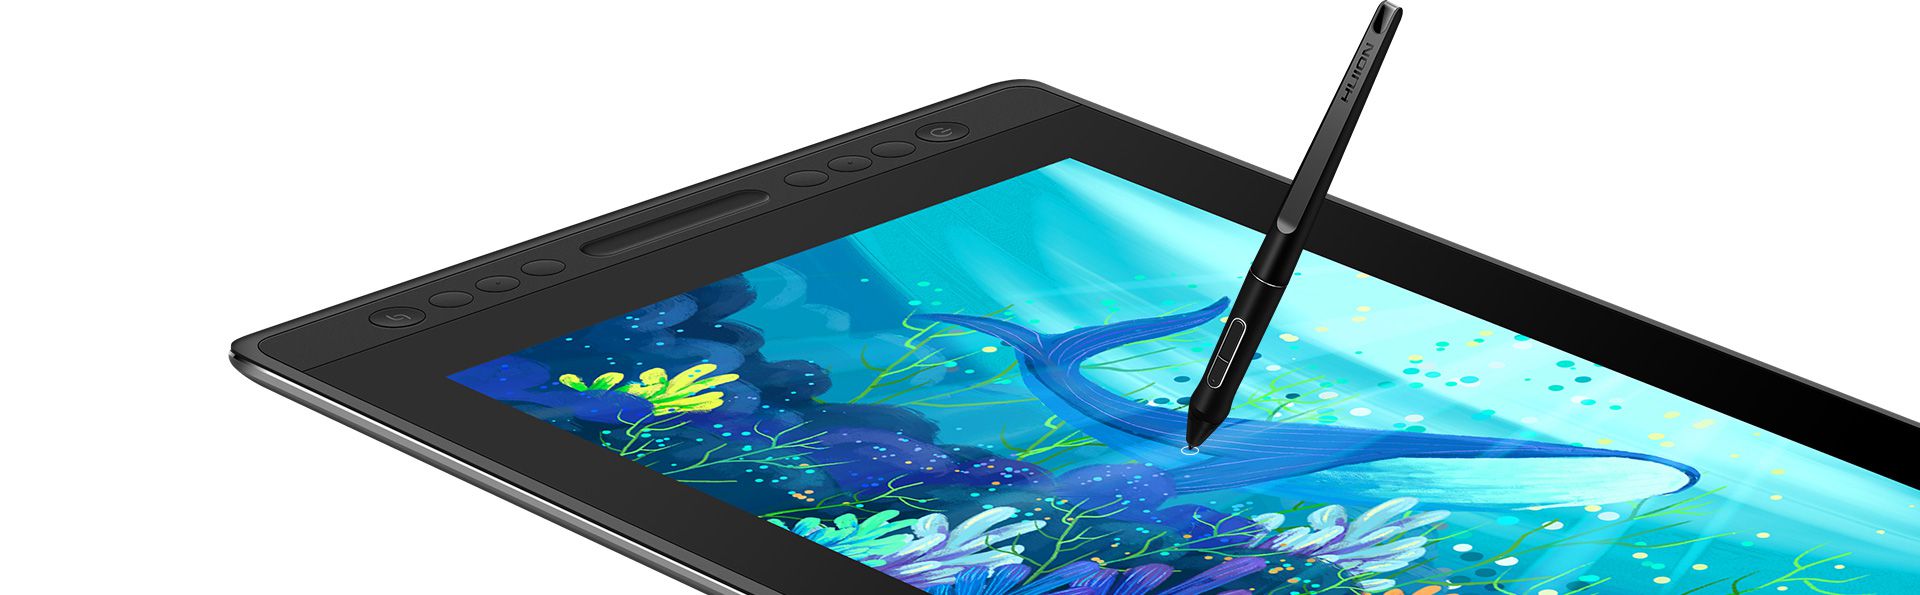 Kamvas Pro 16 Art Tablet with Screen & Drawing Tablet Monitor | Huion